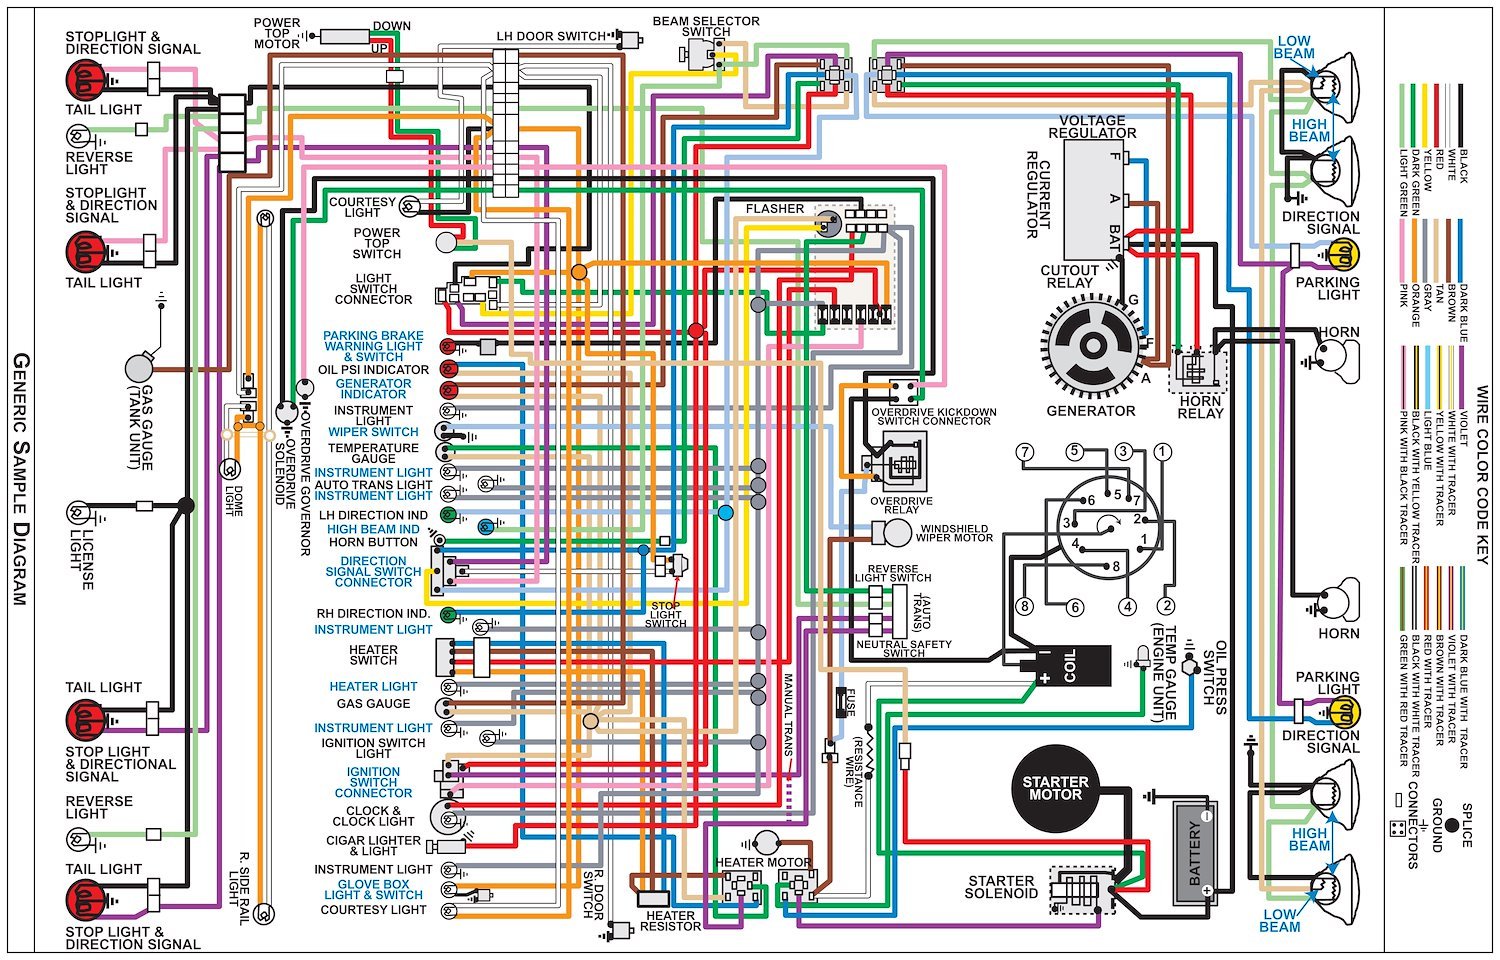 Wiring Diagram for 1967 Ford E-Series (Econoline), 11 in x 17 in., Laminated